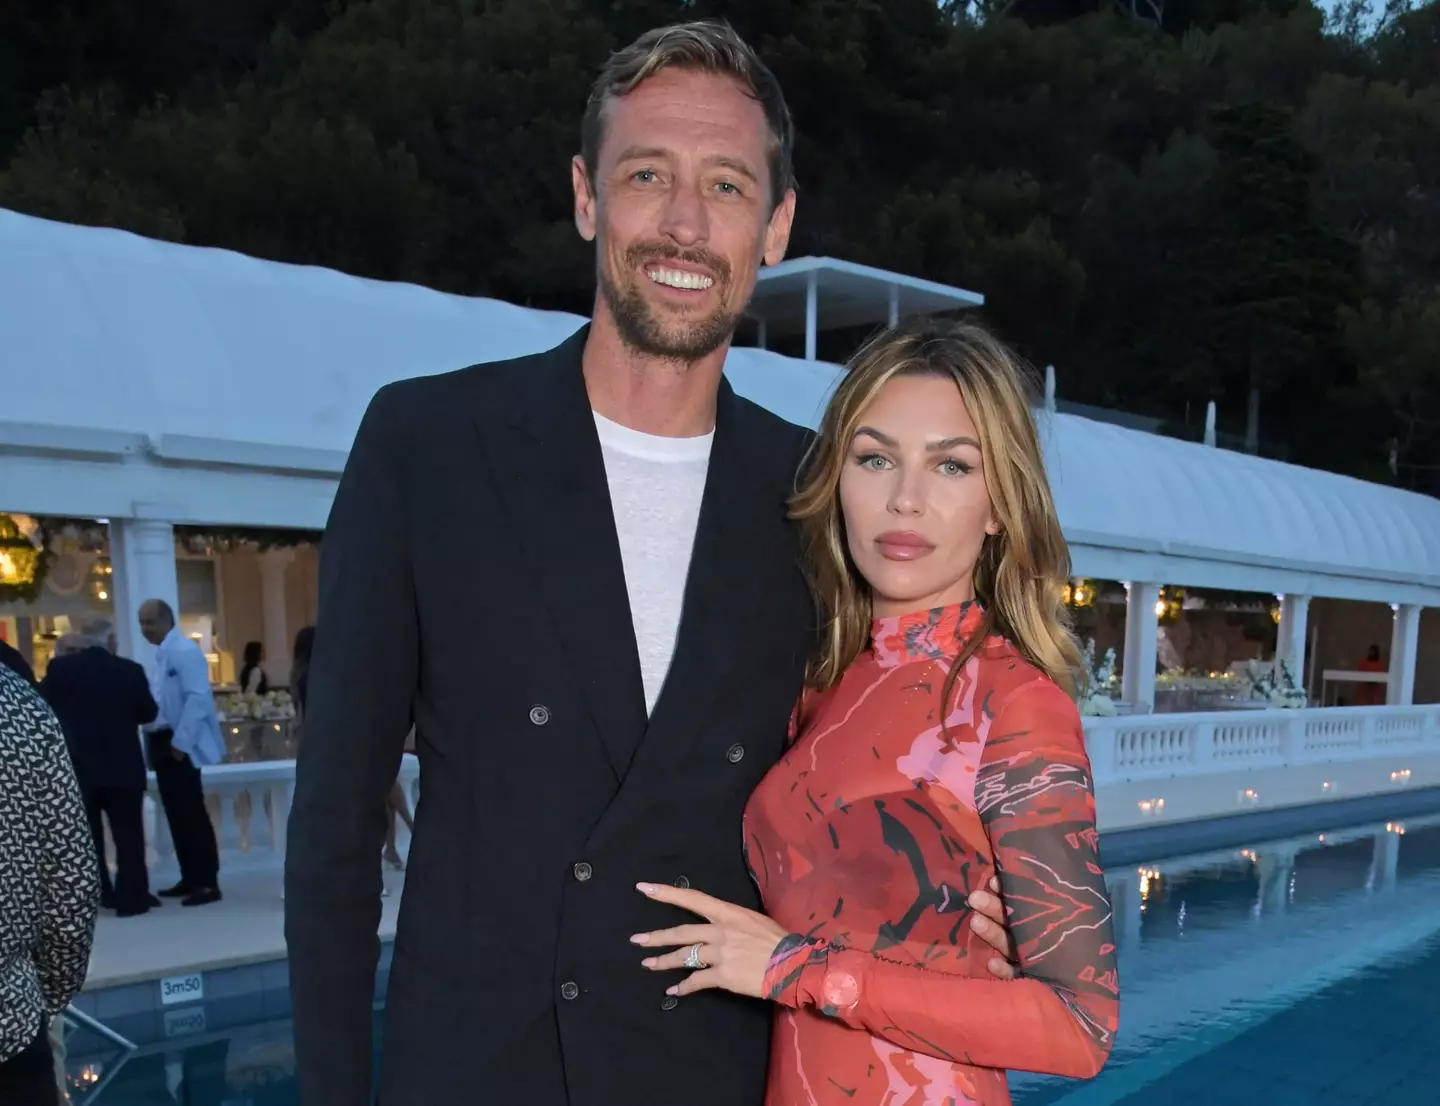 Abbey Clancy and Peter Crouch have their own podcast as a couple.